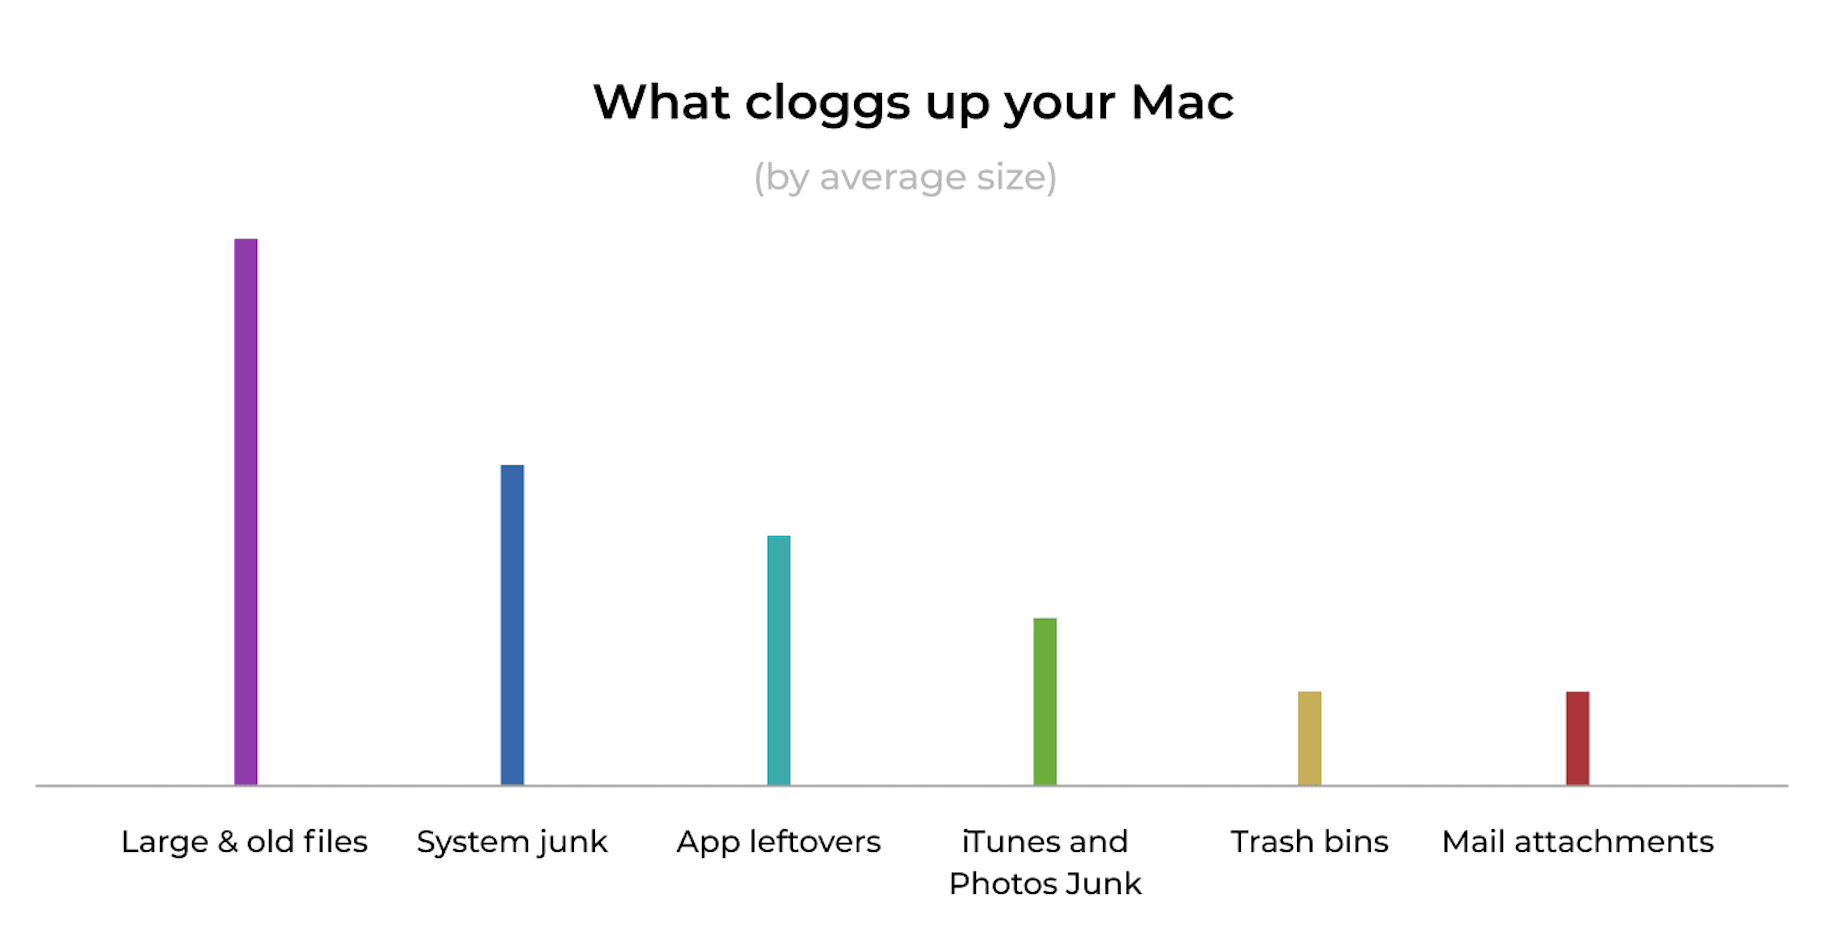 How to Clean Up Mac? — 12 Steps to Clean MacBook